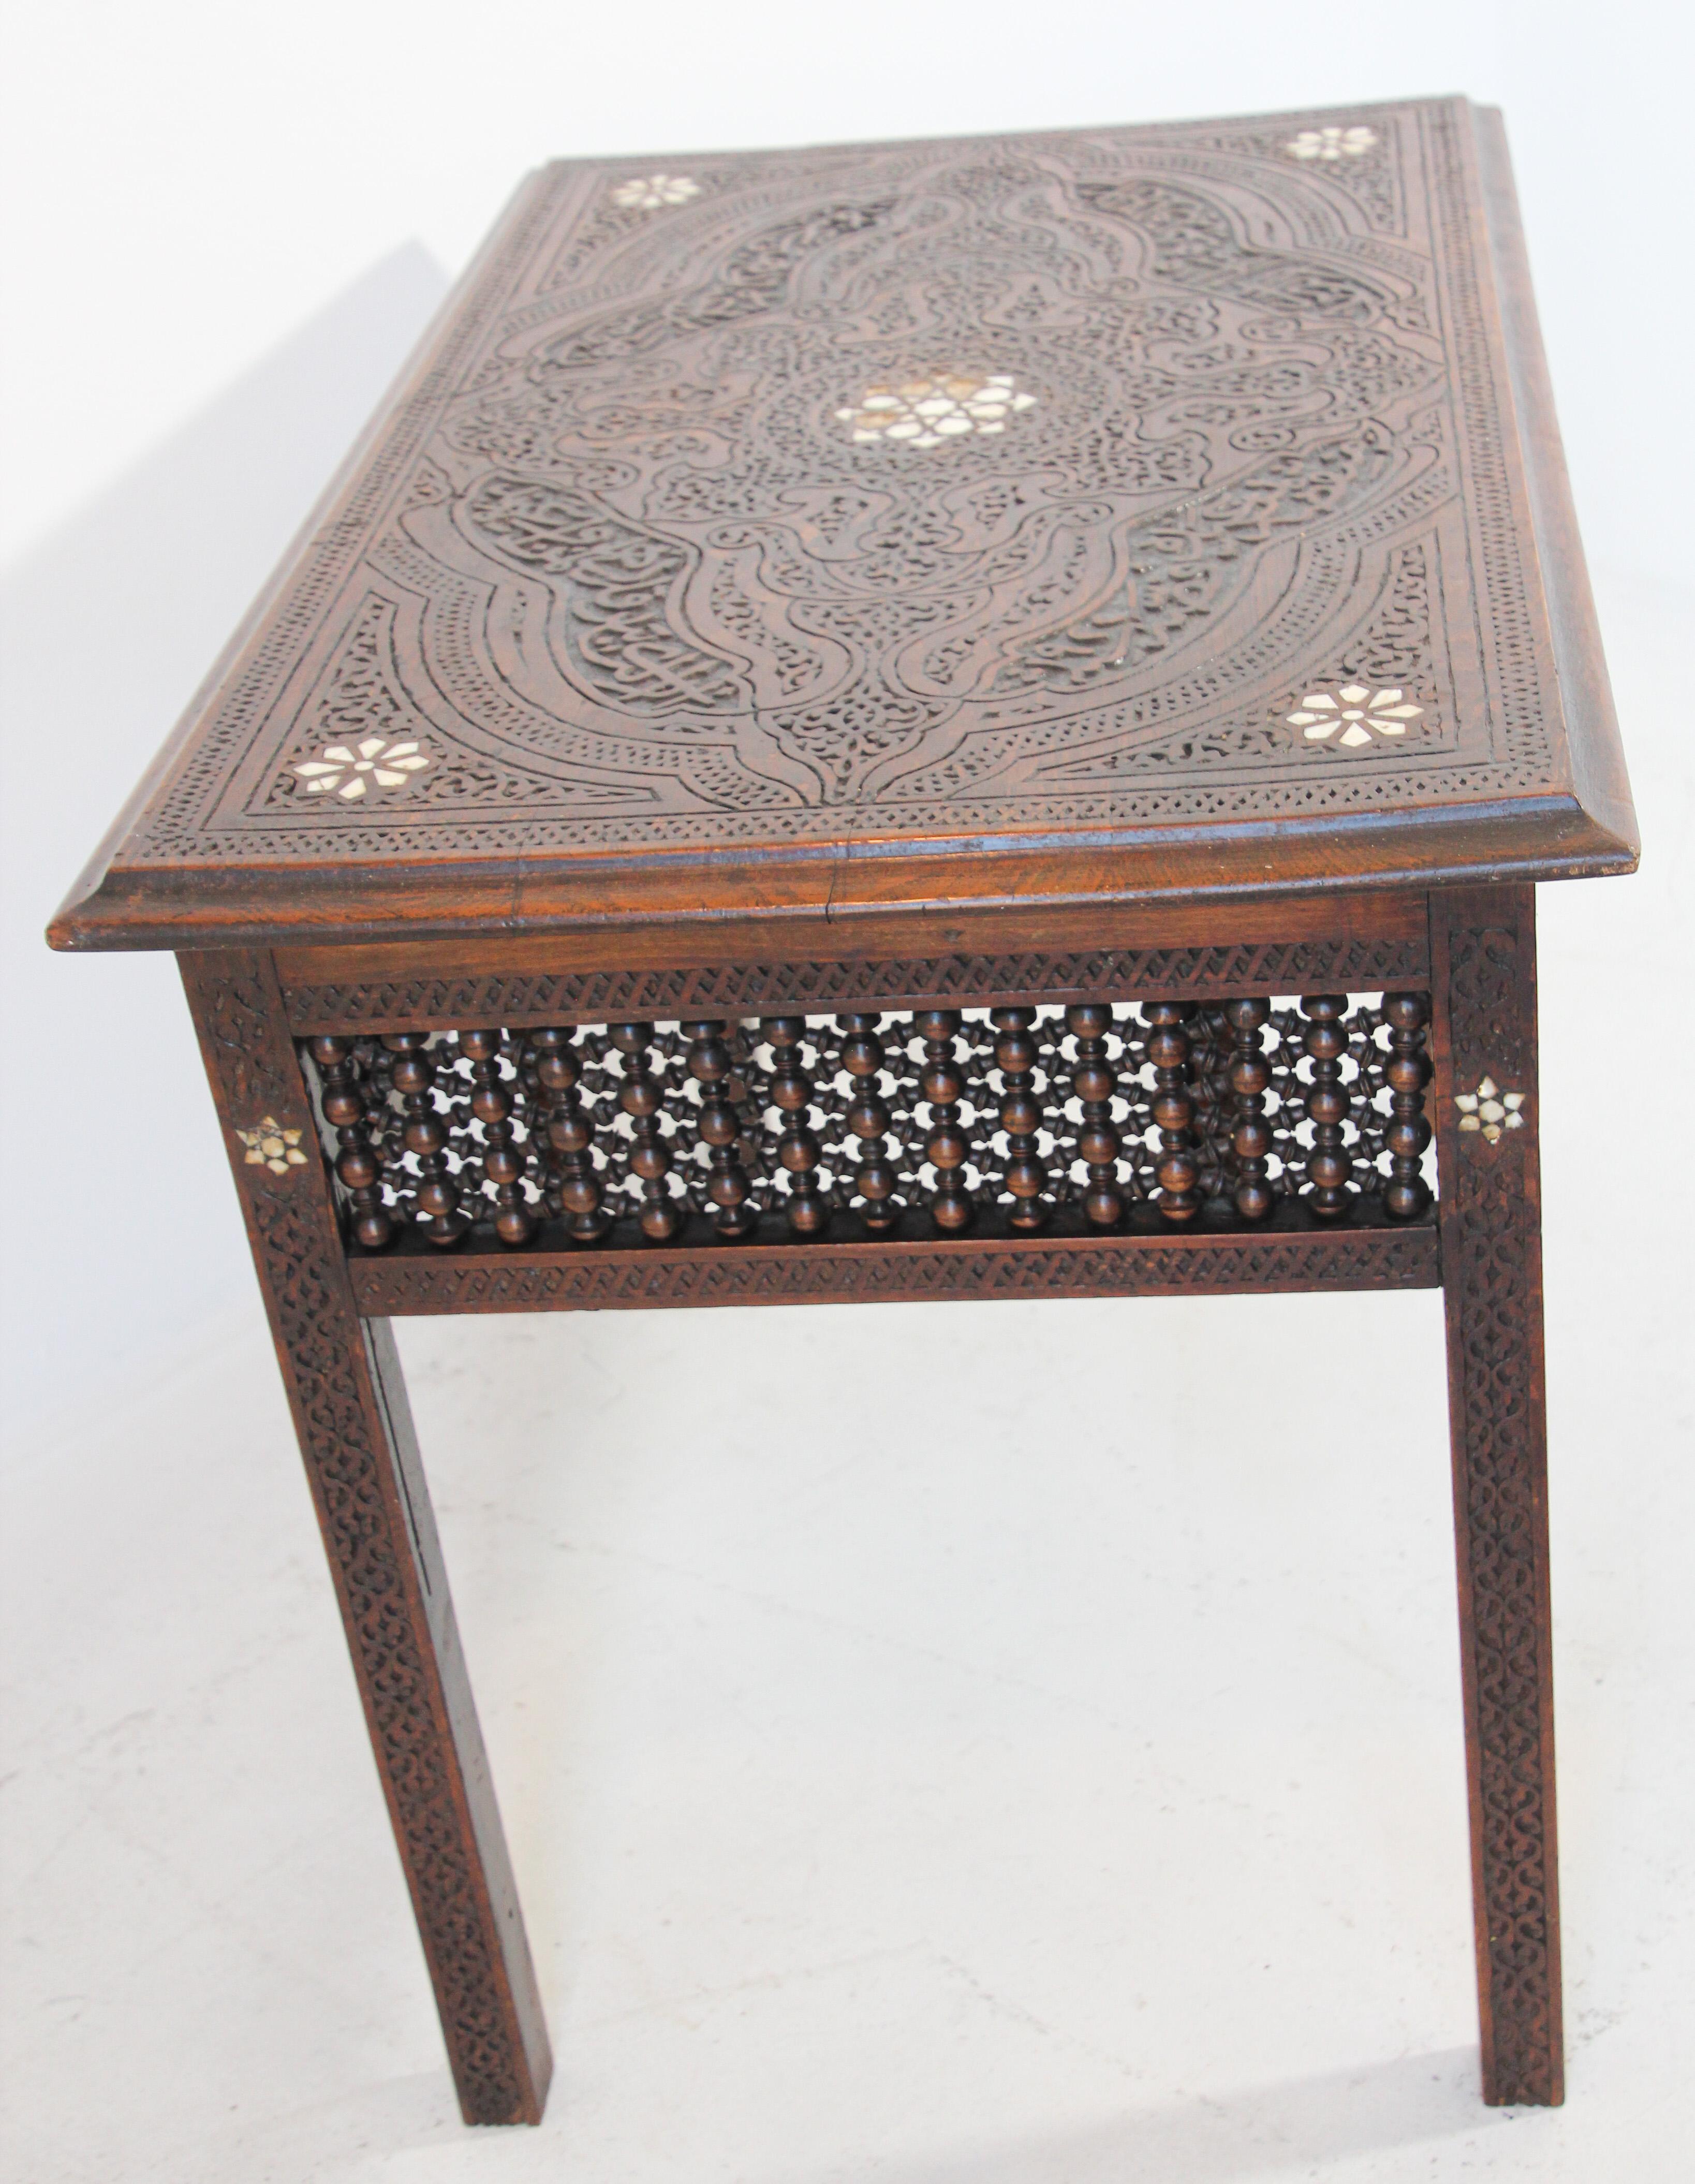 19th Century Moorish Tea Table Inlaid with Mother of Pearl 4